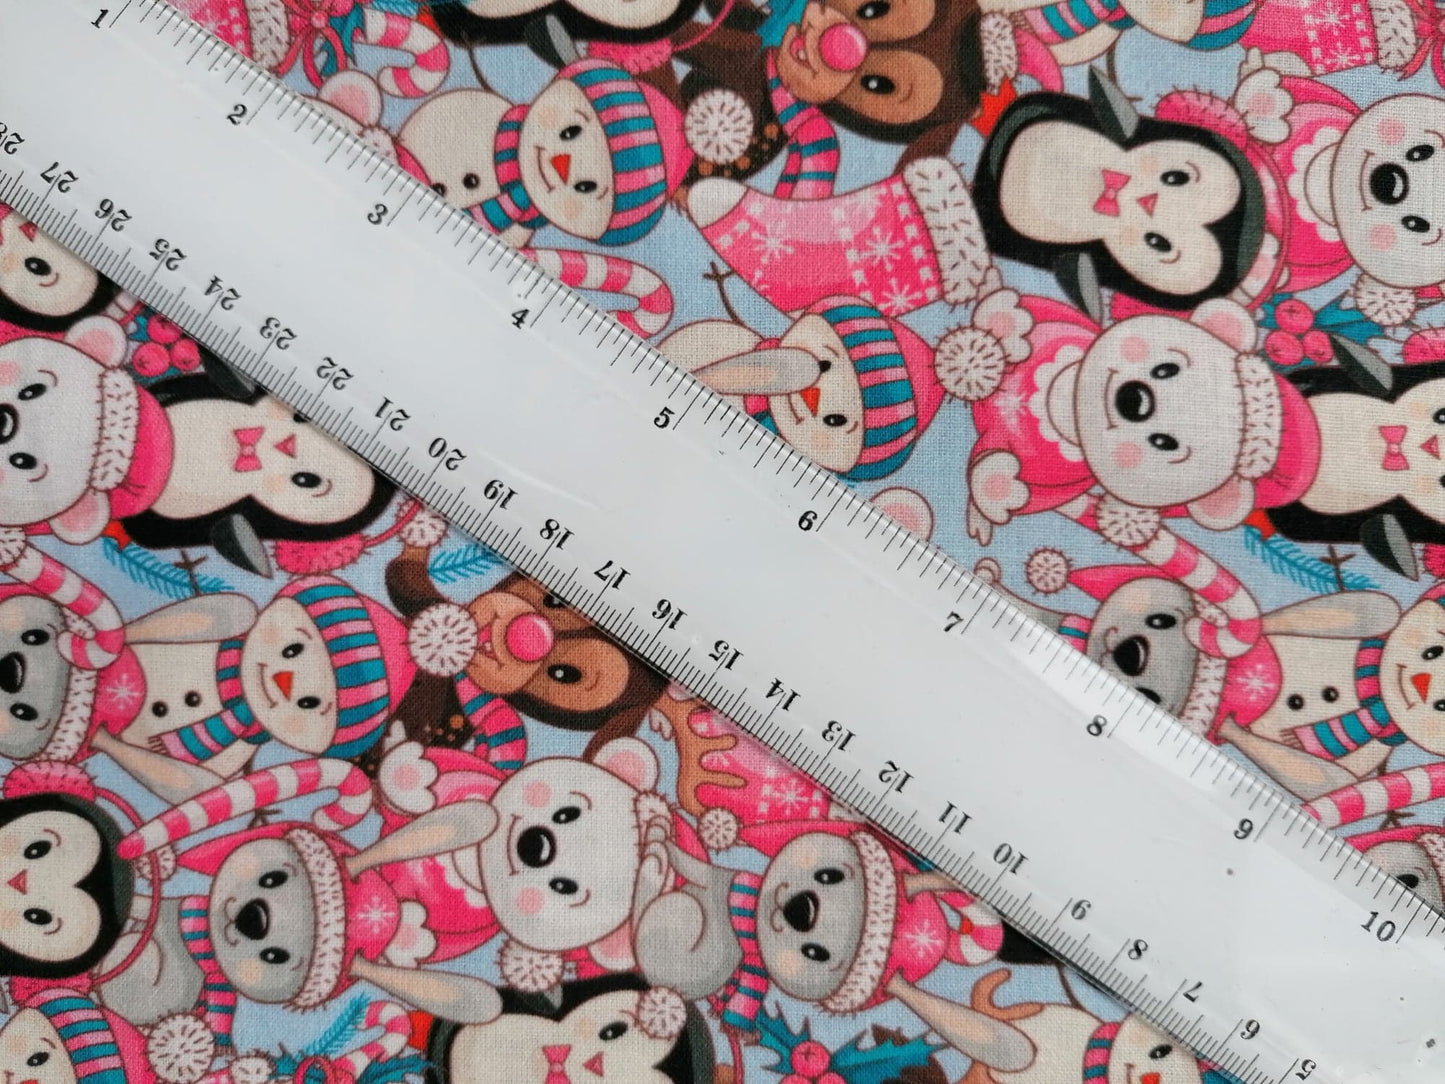 100% Cotton - Quilting and Crafting - Christmas - Pink/Blue/Black/Grey - 44" Wide - Sold By the Metre